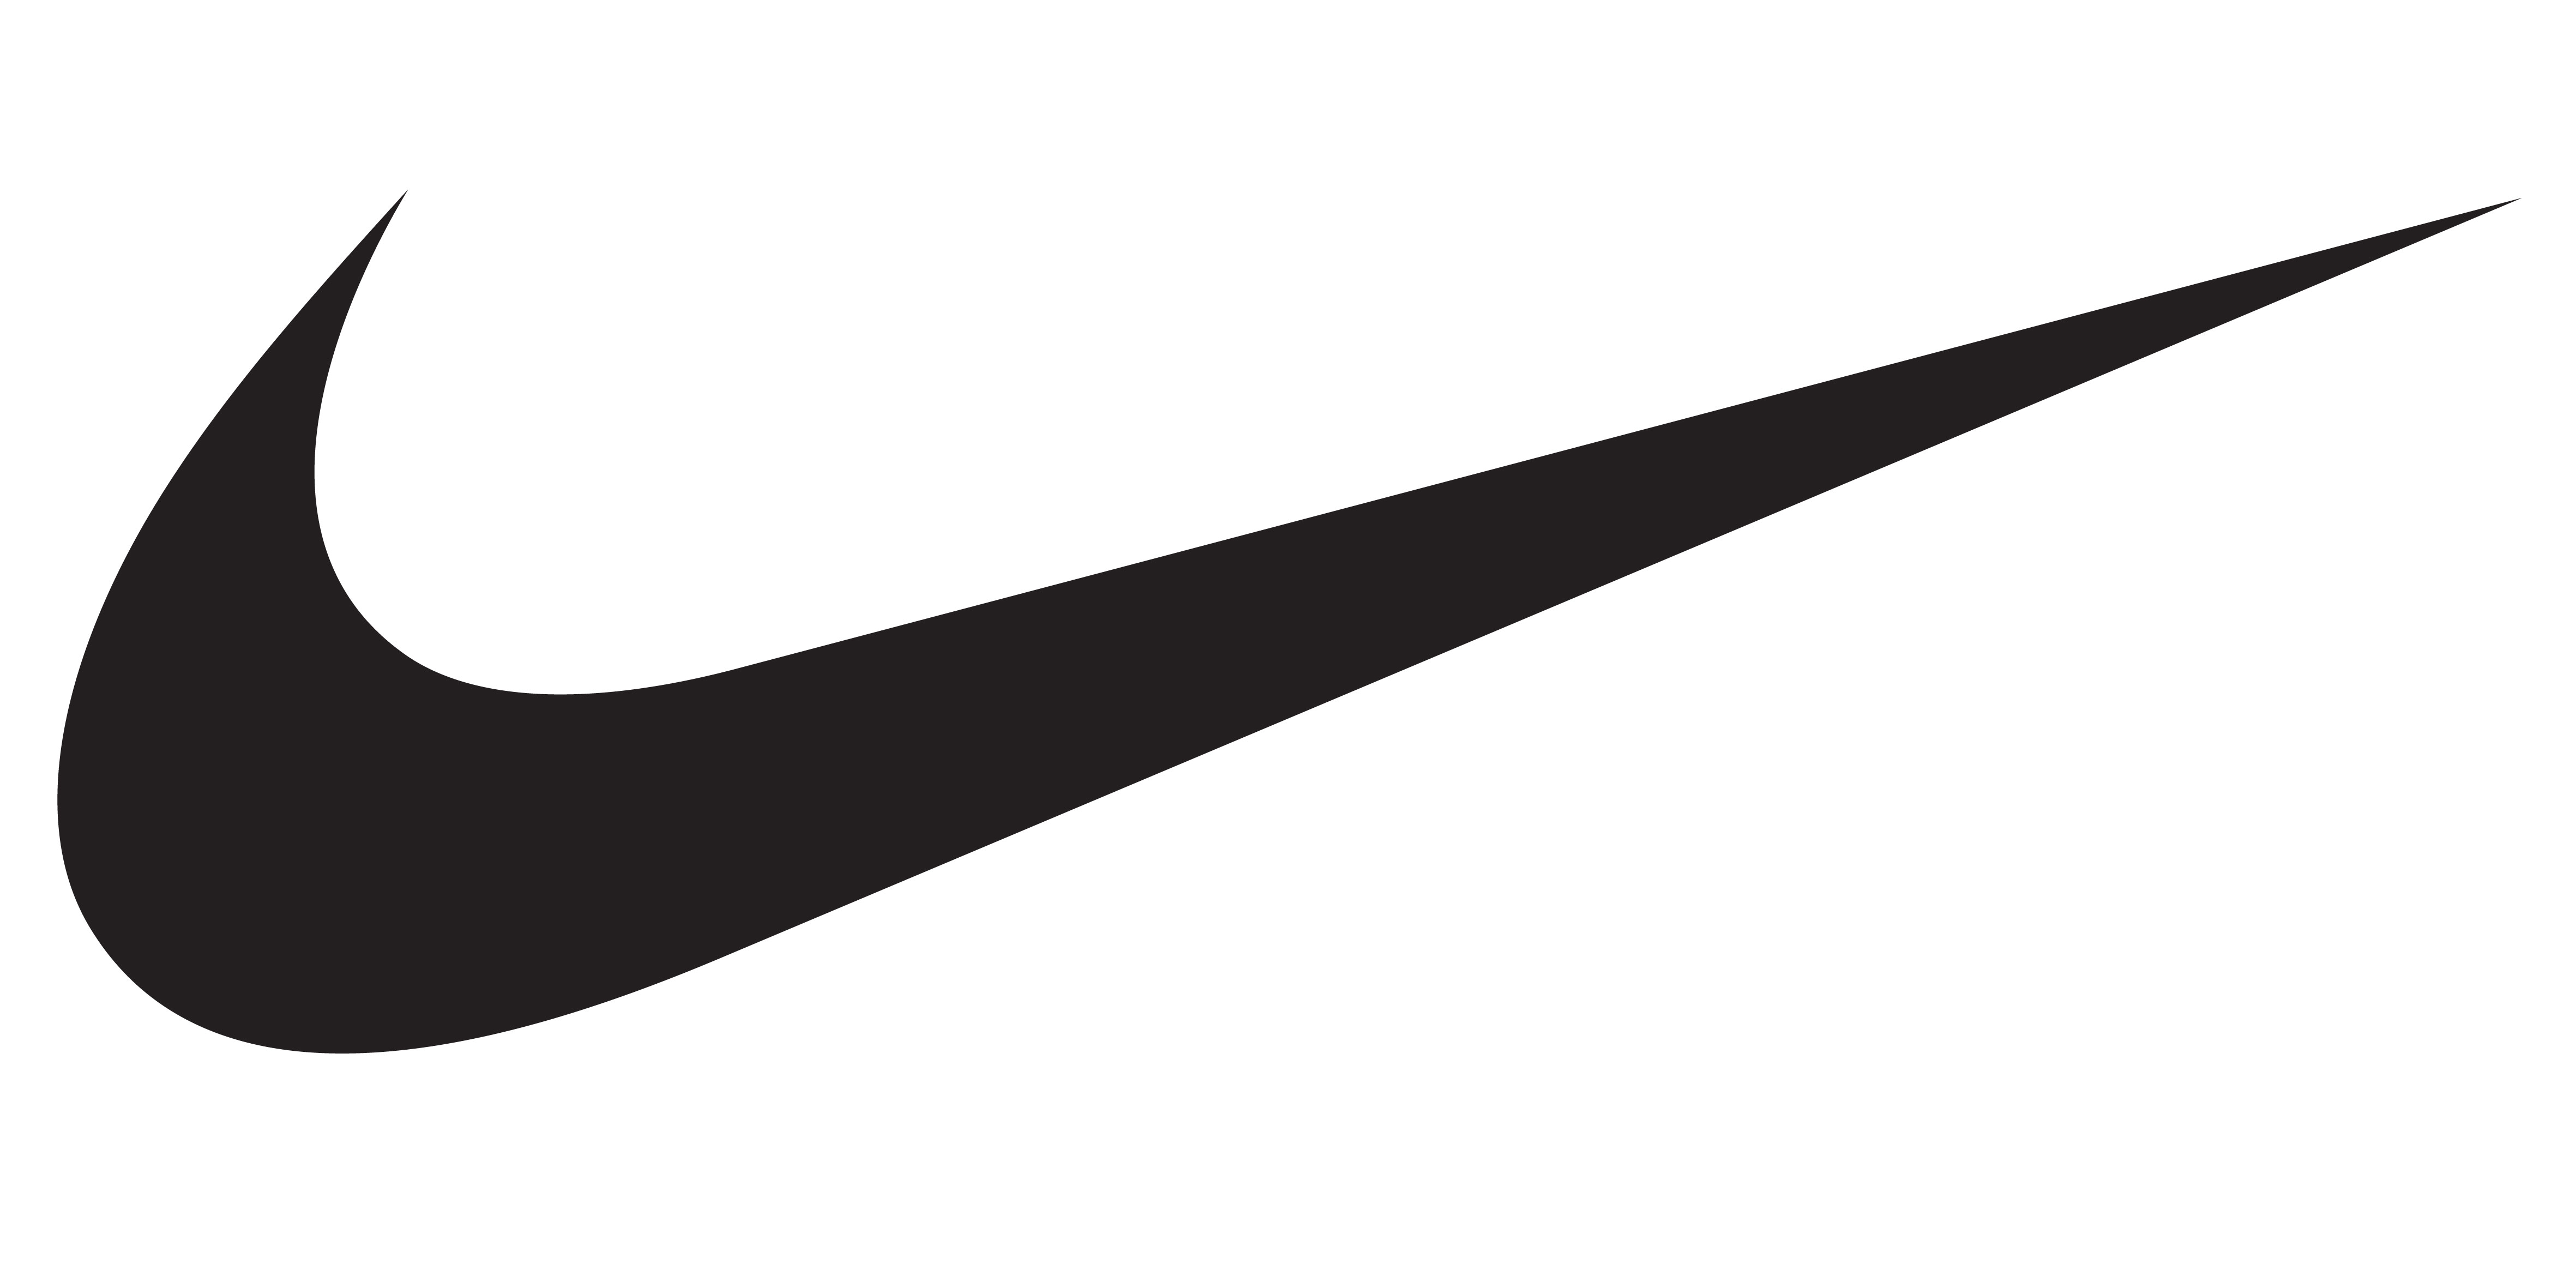 Nike Swoosh Vector at Vectorified.com | Collection of Nike Swoosh ...